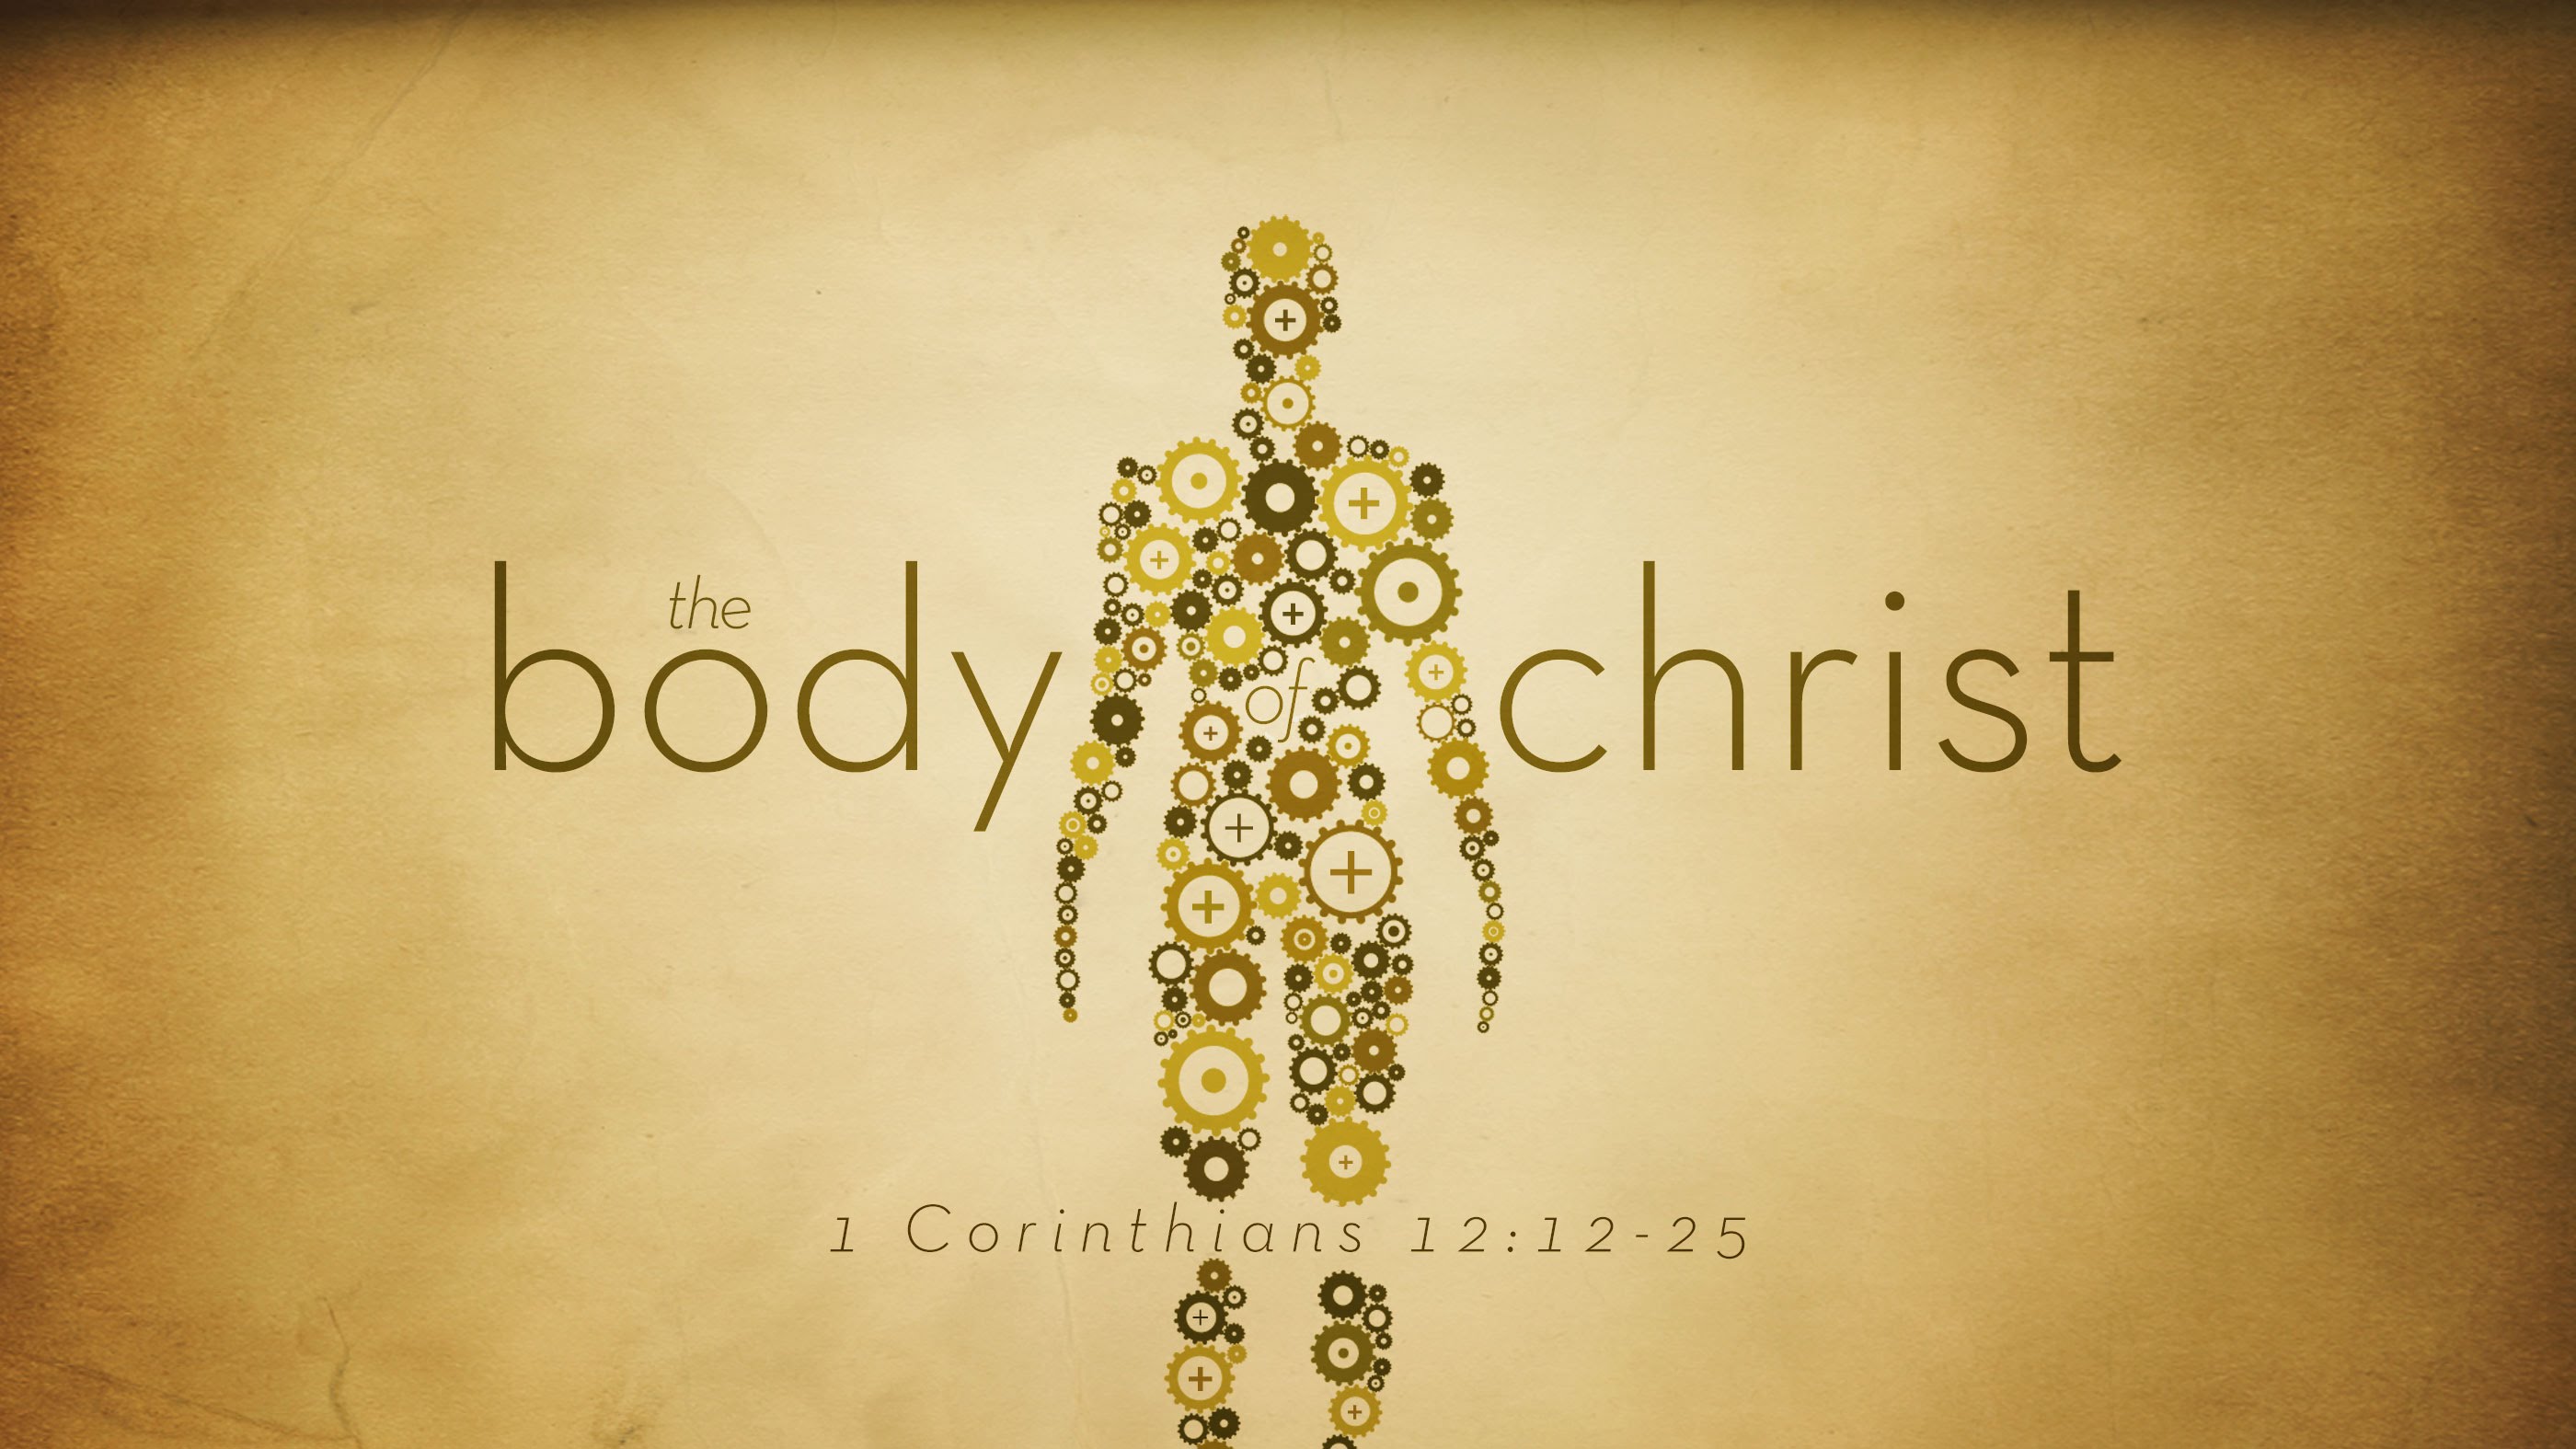 The body of Christ